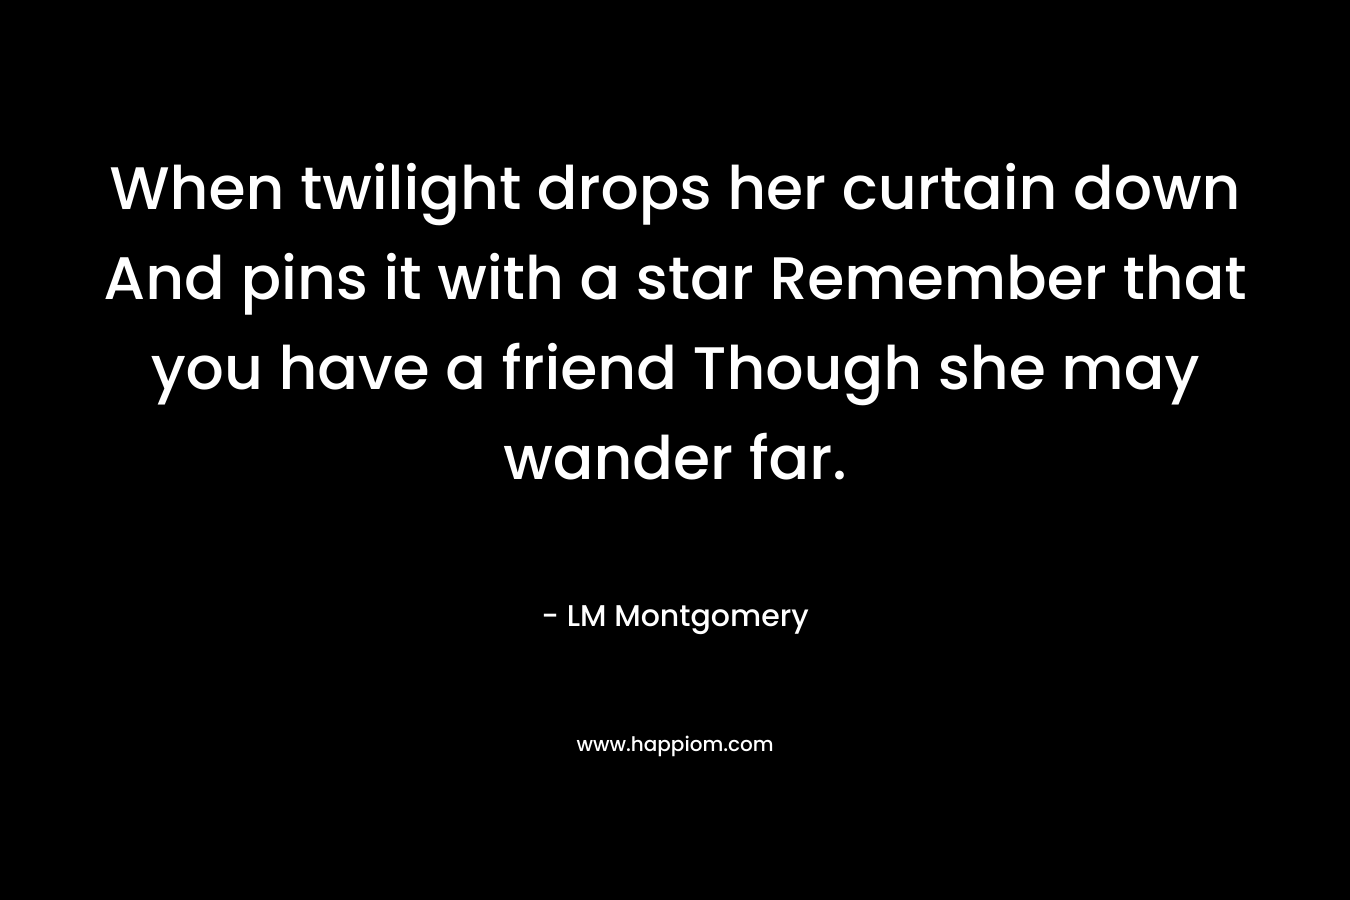 When twilight drops her curtain down And pins it with a star Remember that you have a friend Though she may wander far.